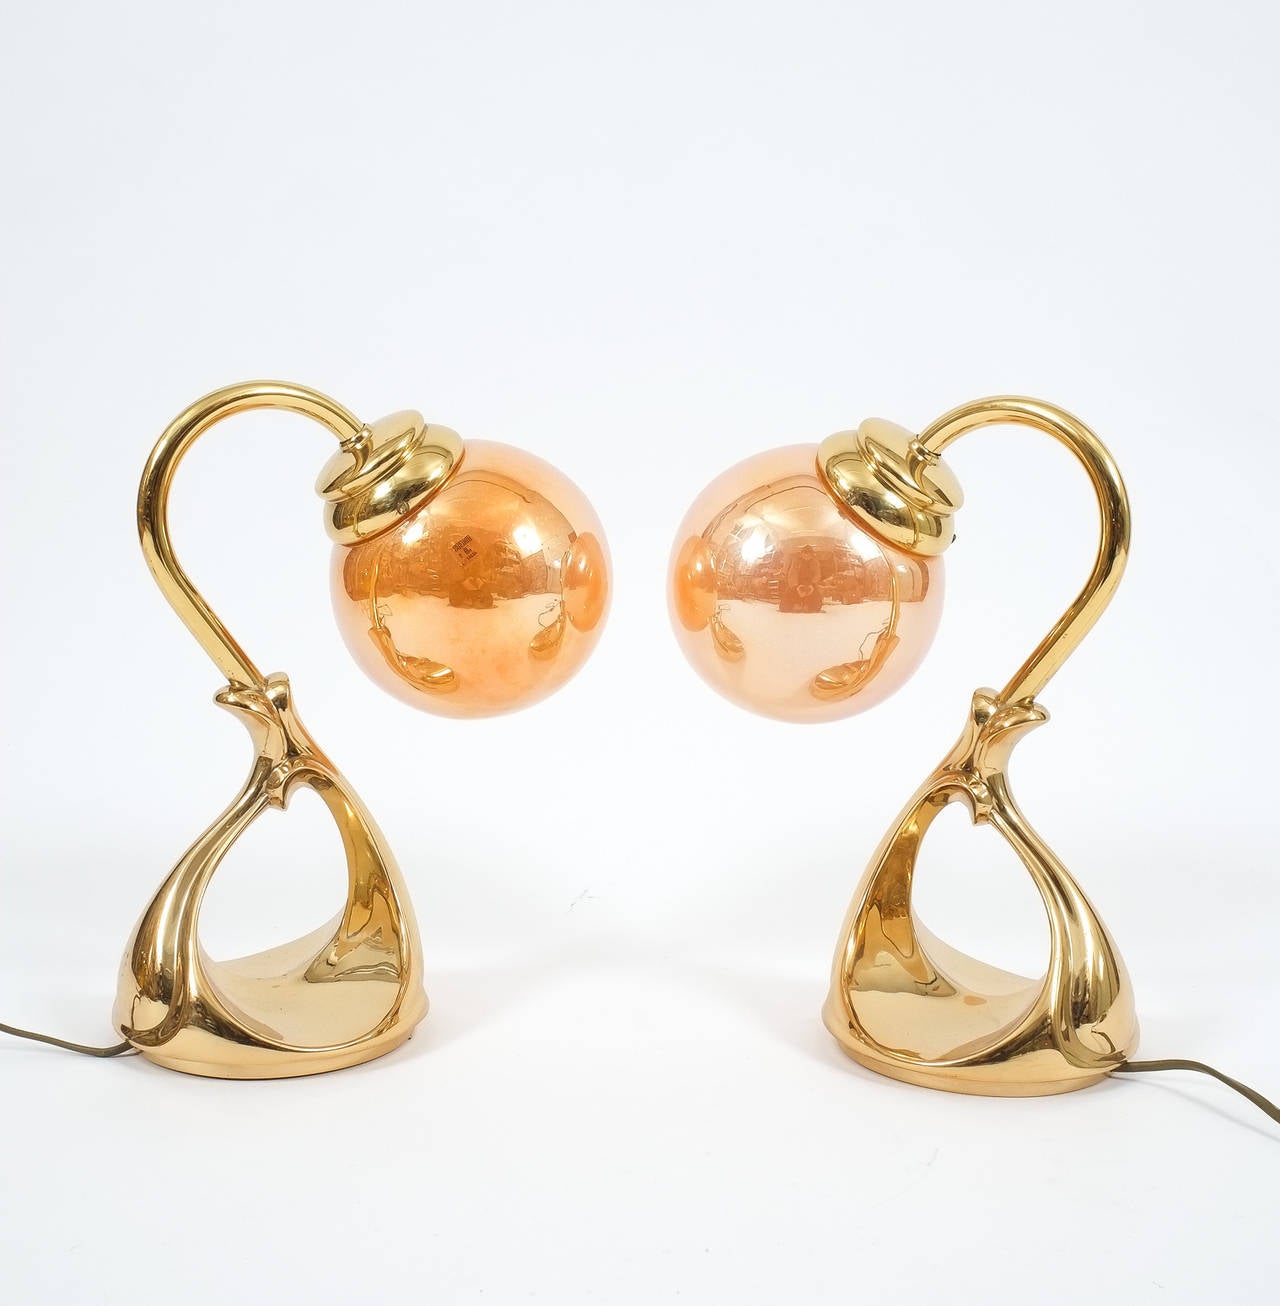 Hollywood Regency Pair of Table Lamps in Brass and Glass by Vetri Murano